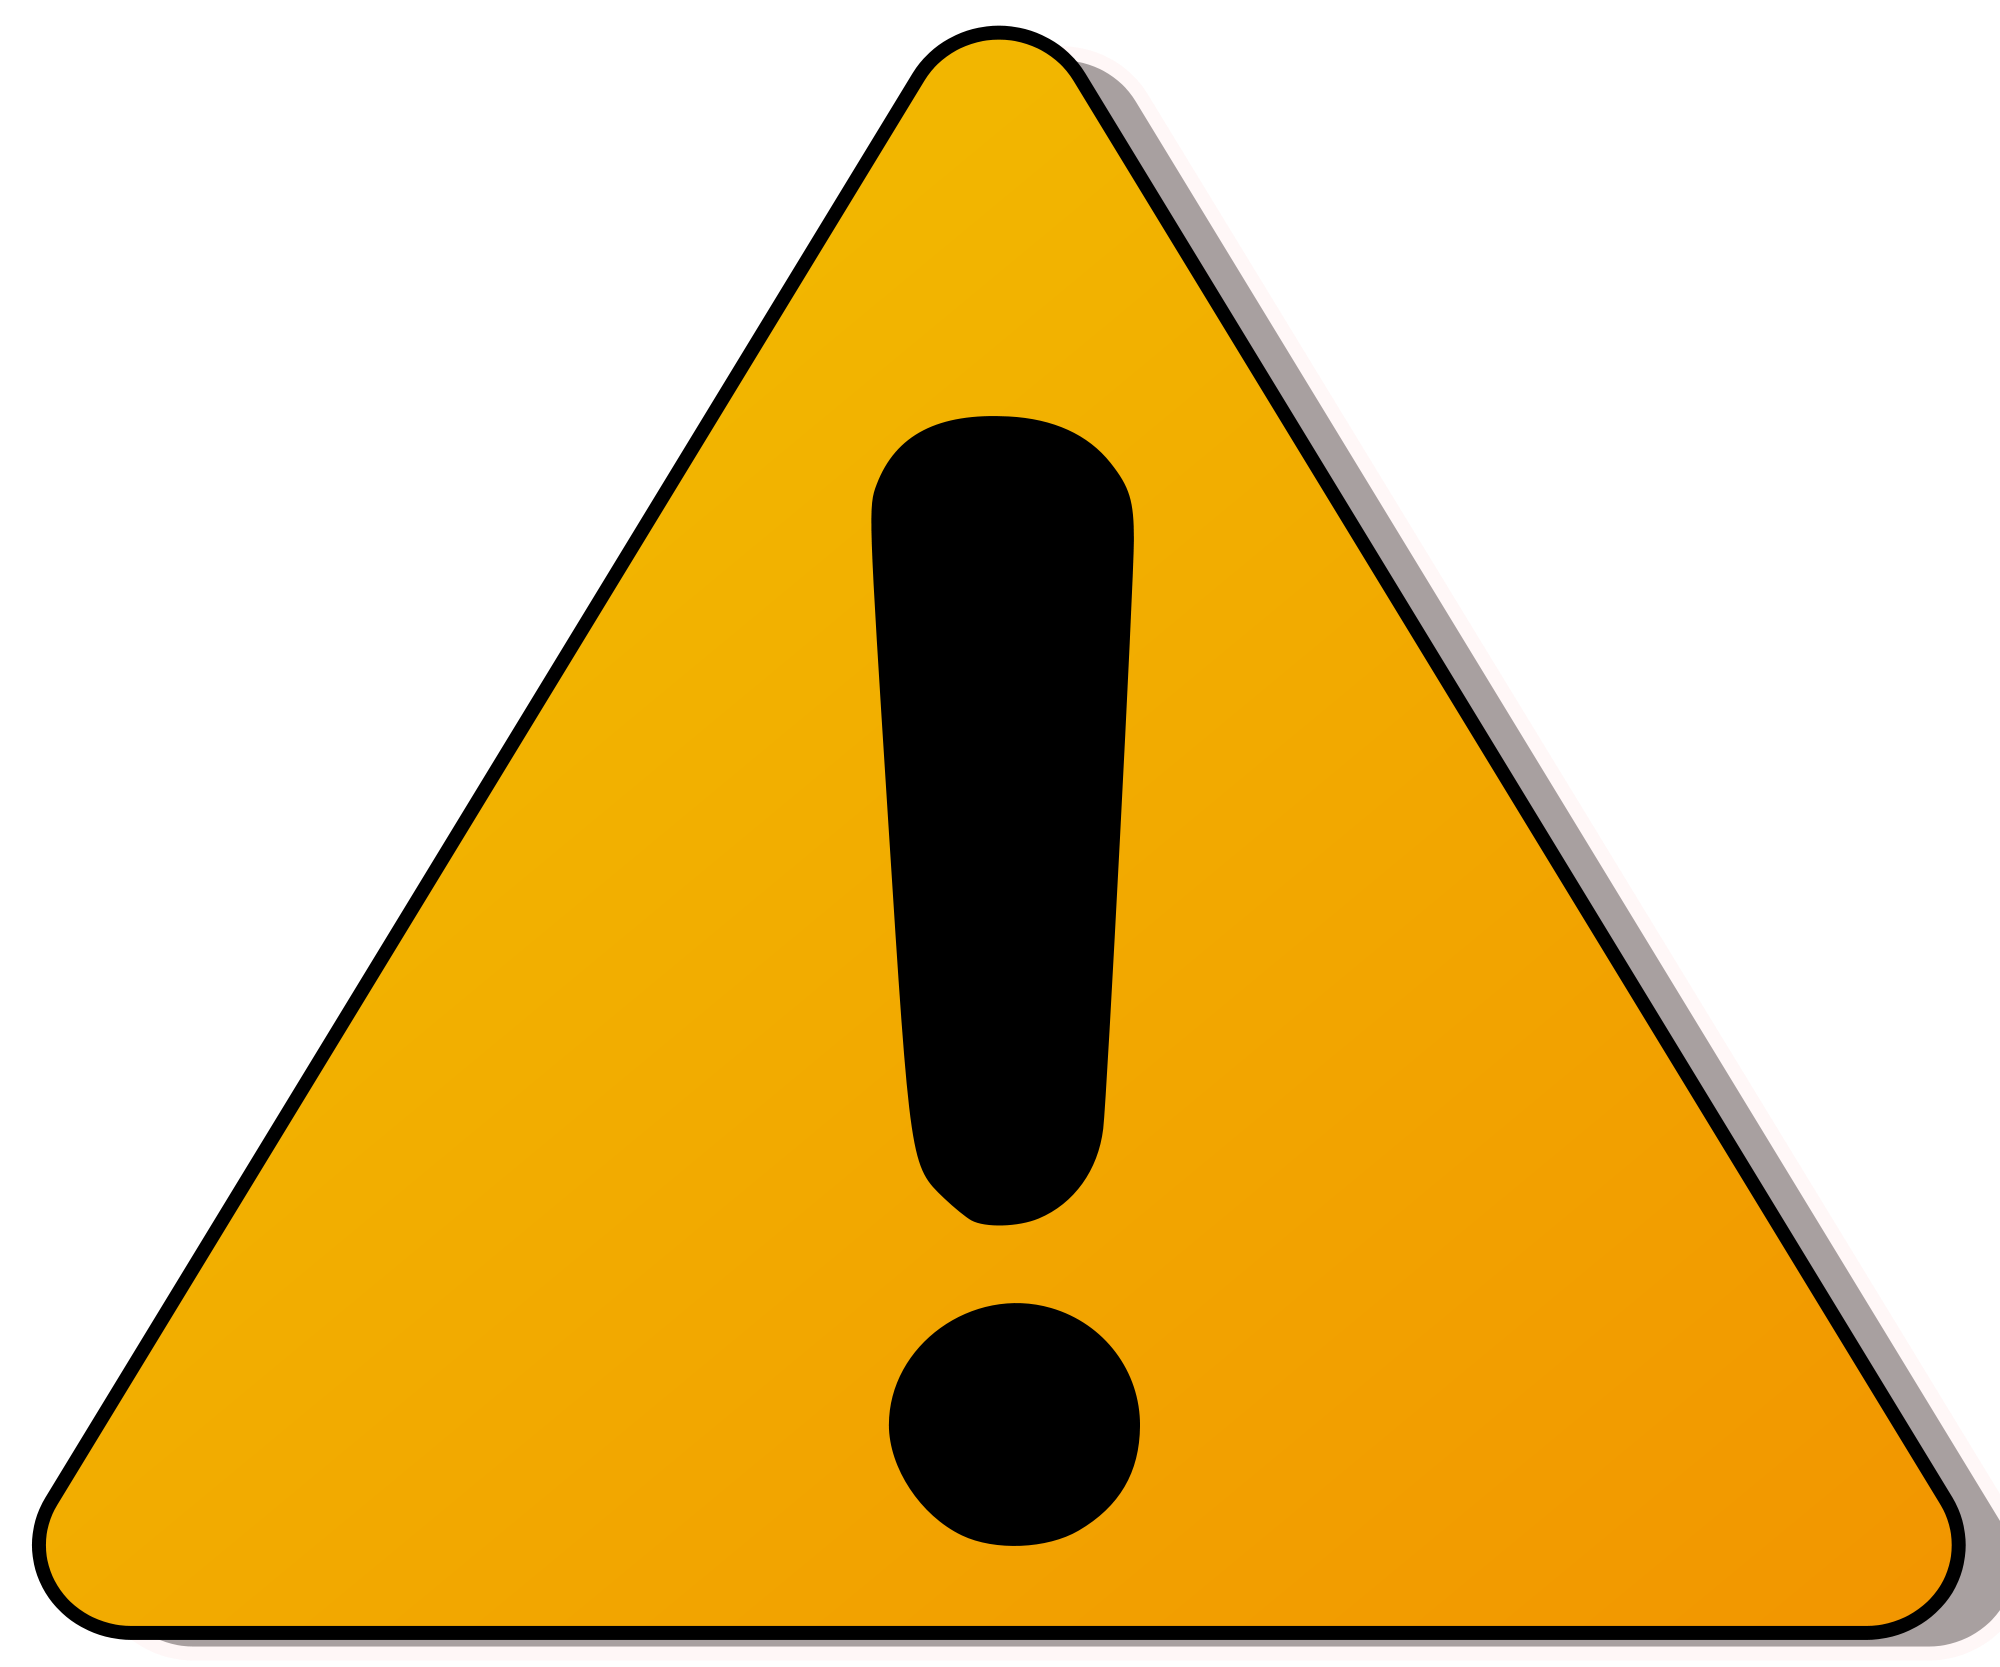 caution clipart warning triangle